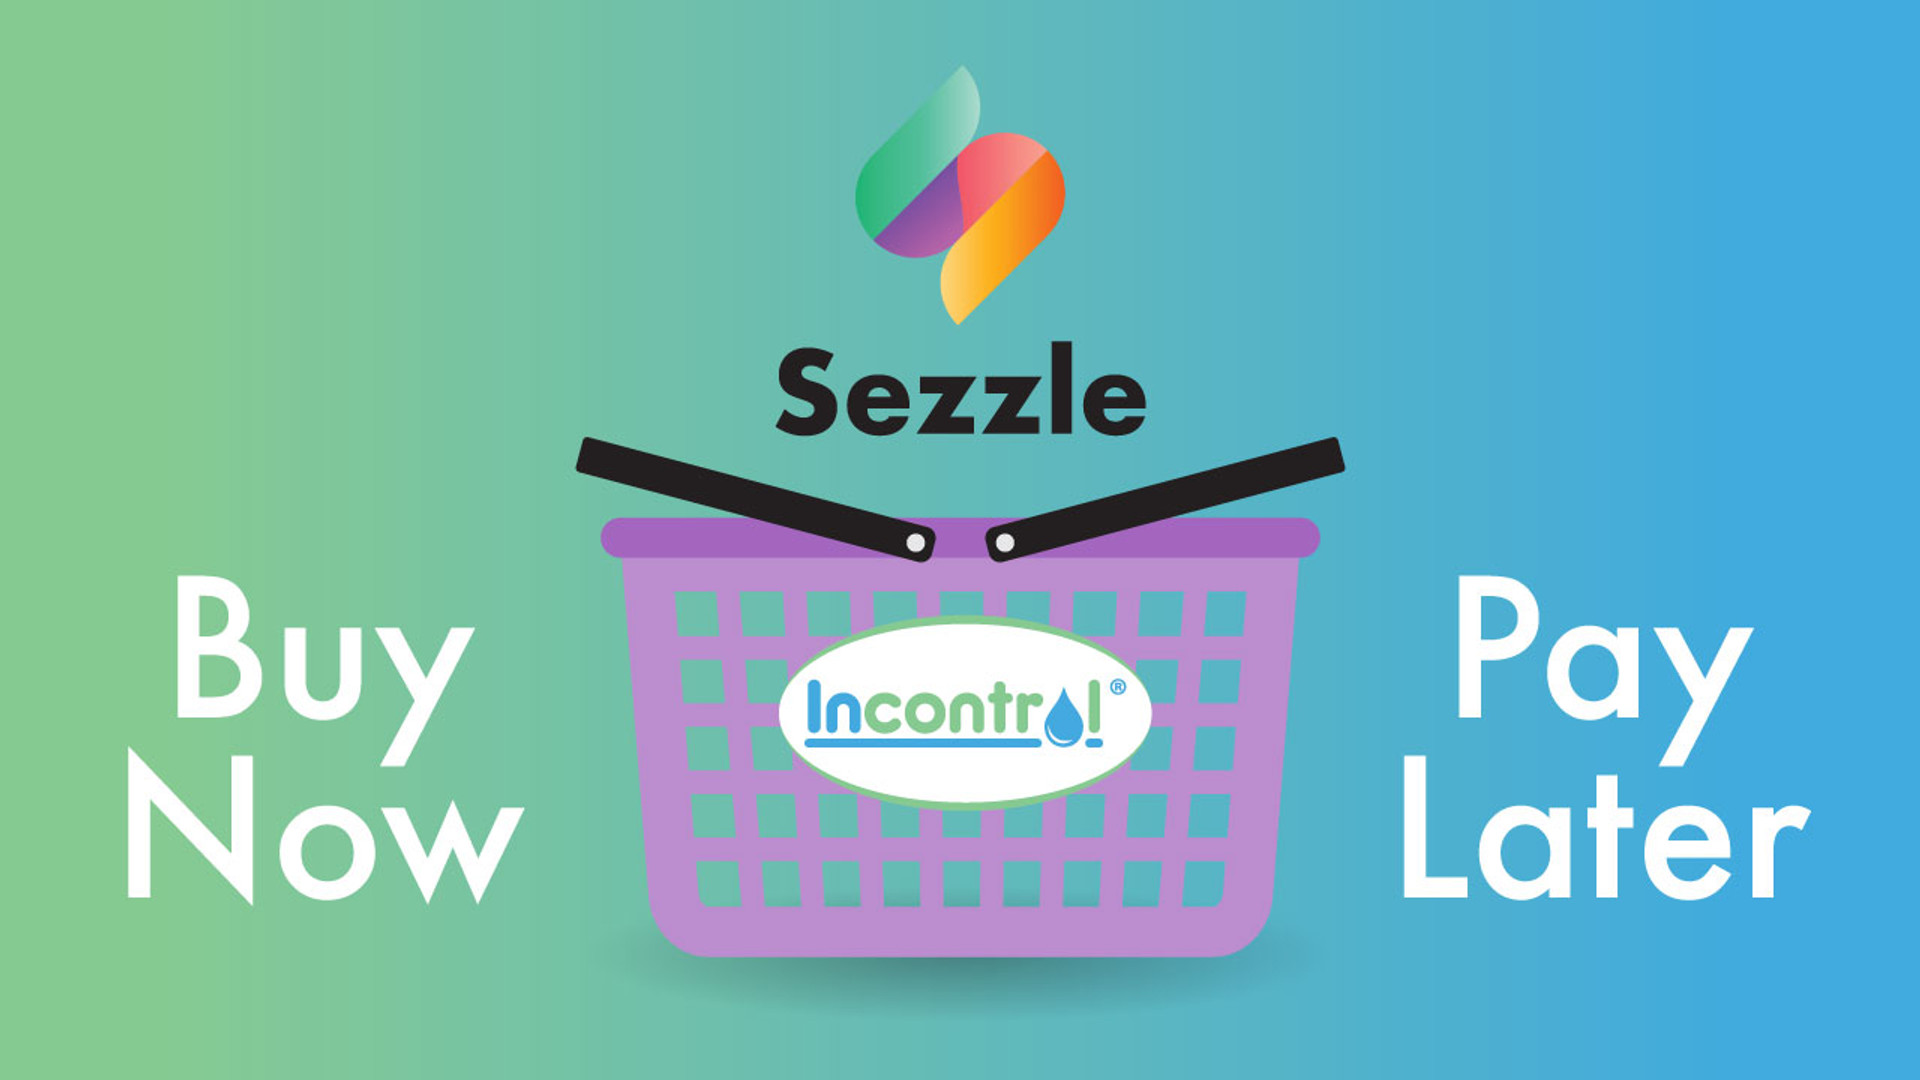 Sezzle A New and Convenient Way to Pay! Incontrol Diapers